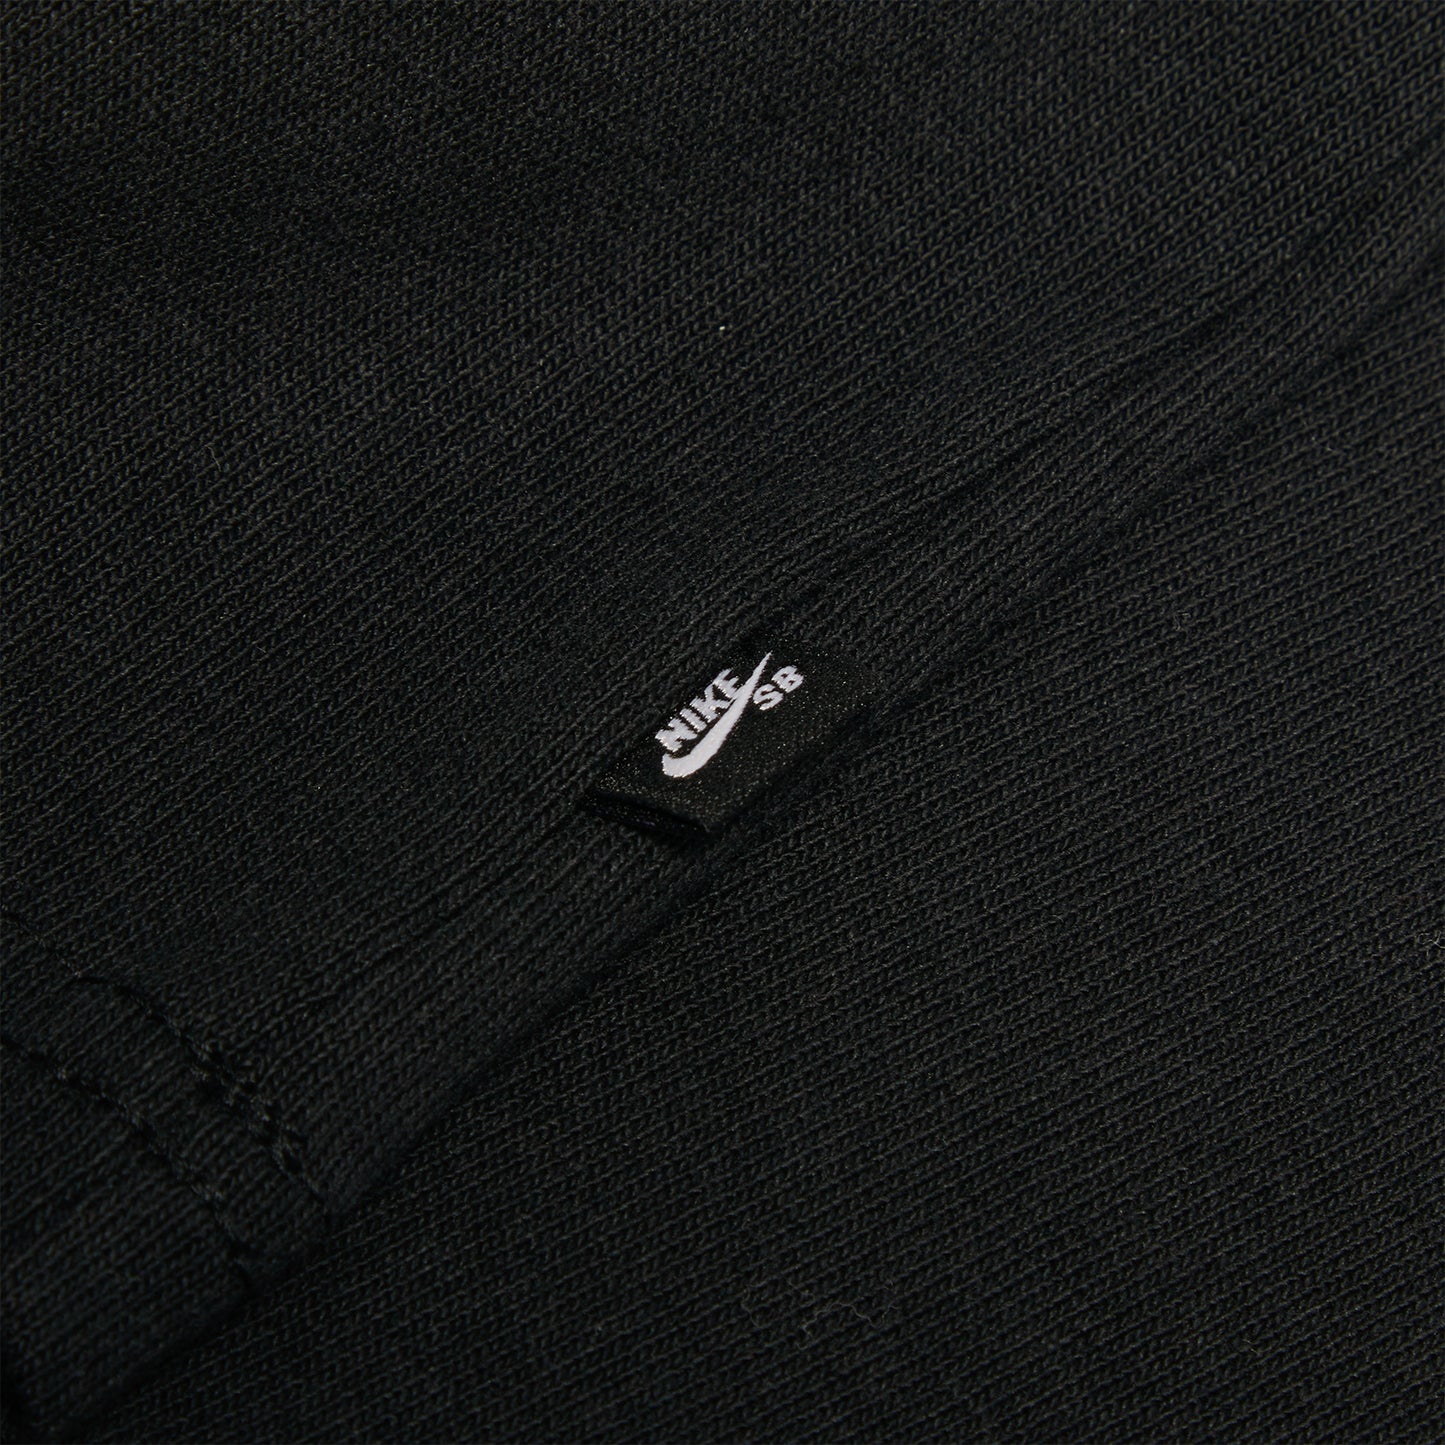 Nike SB Embroidered Patch T-Shirt (Black)